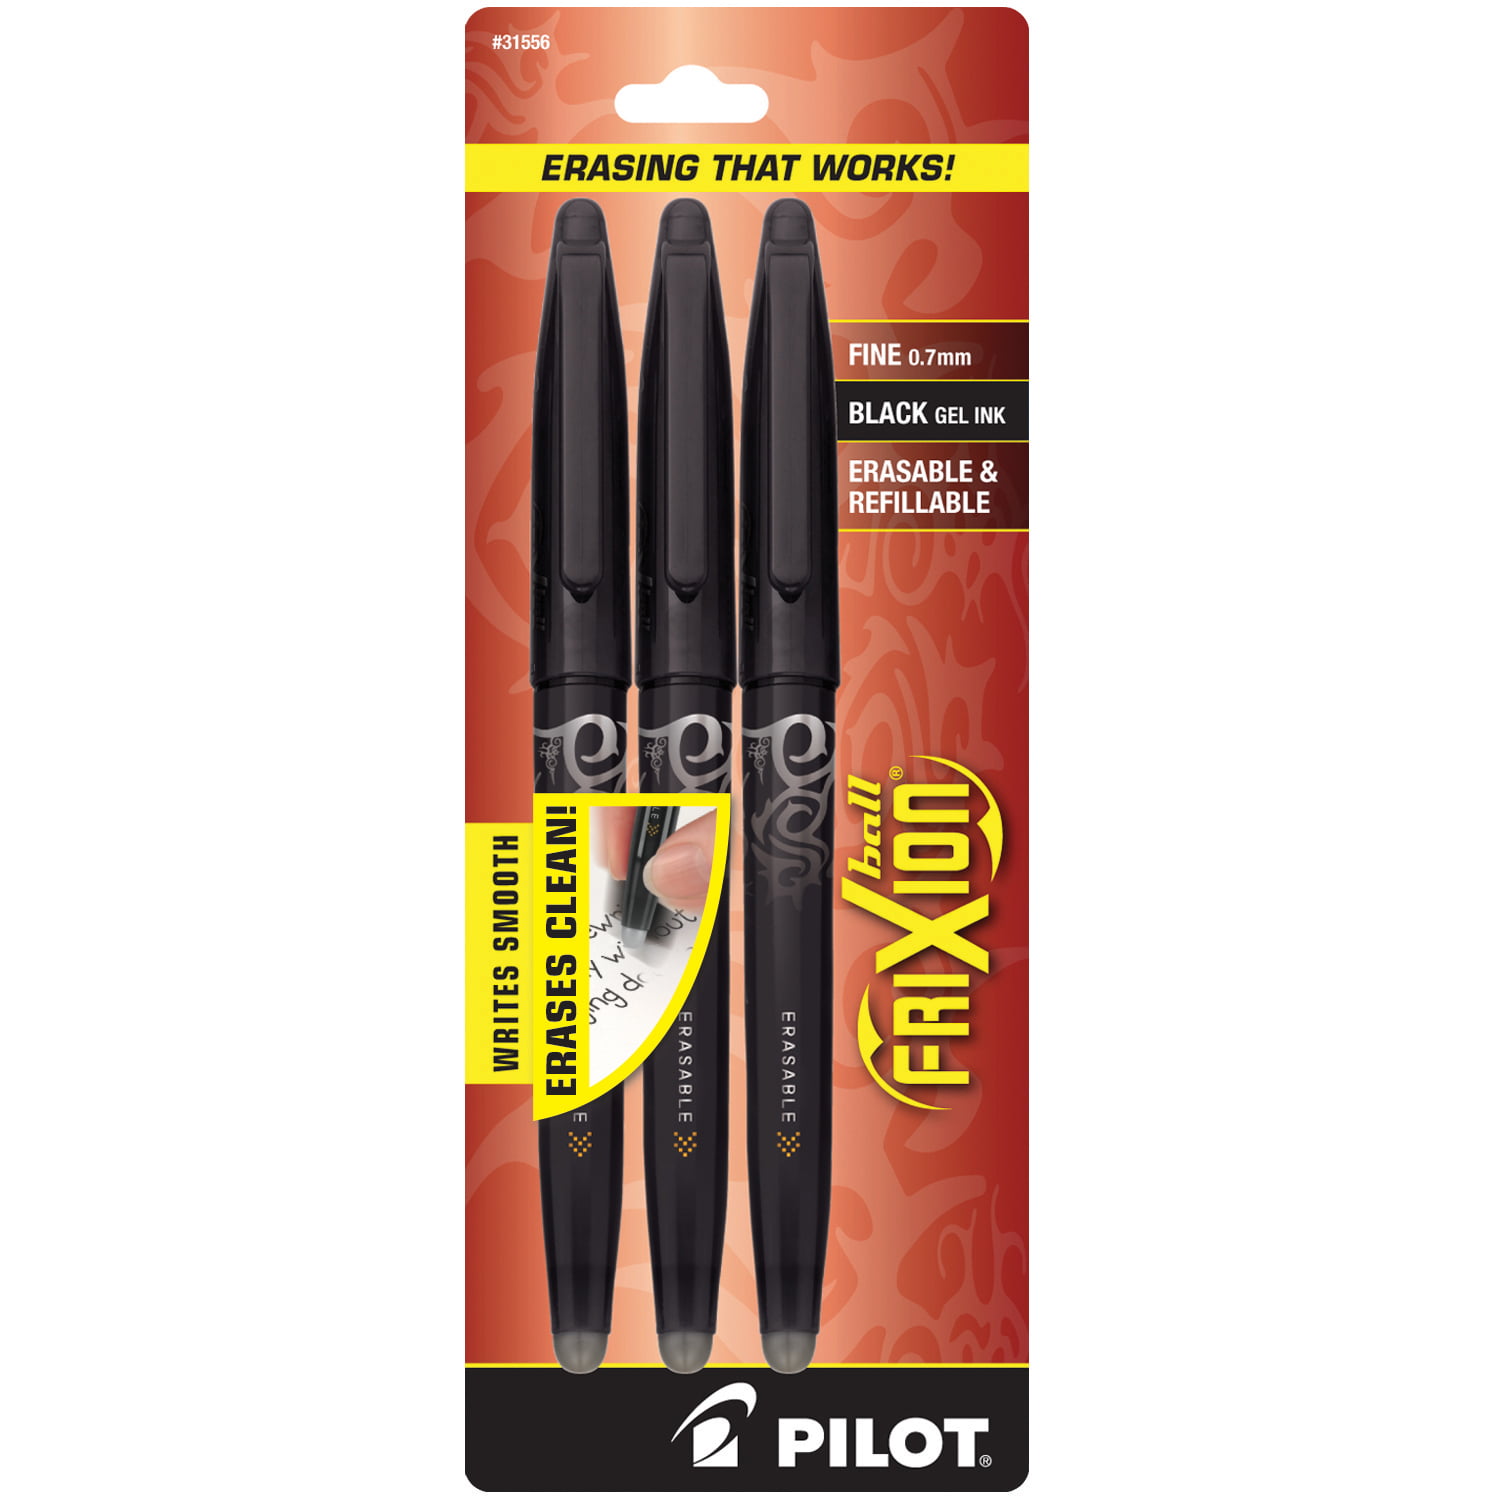 2 x Packs of 3 Black New Pilot FriXion Erasable Rollerball Pen 0.7 mm Tip 